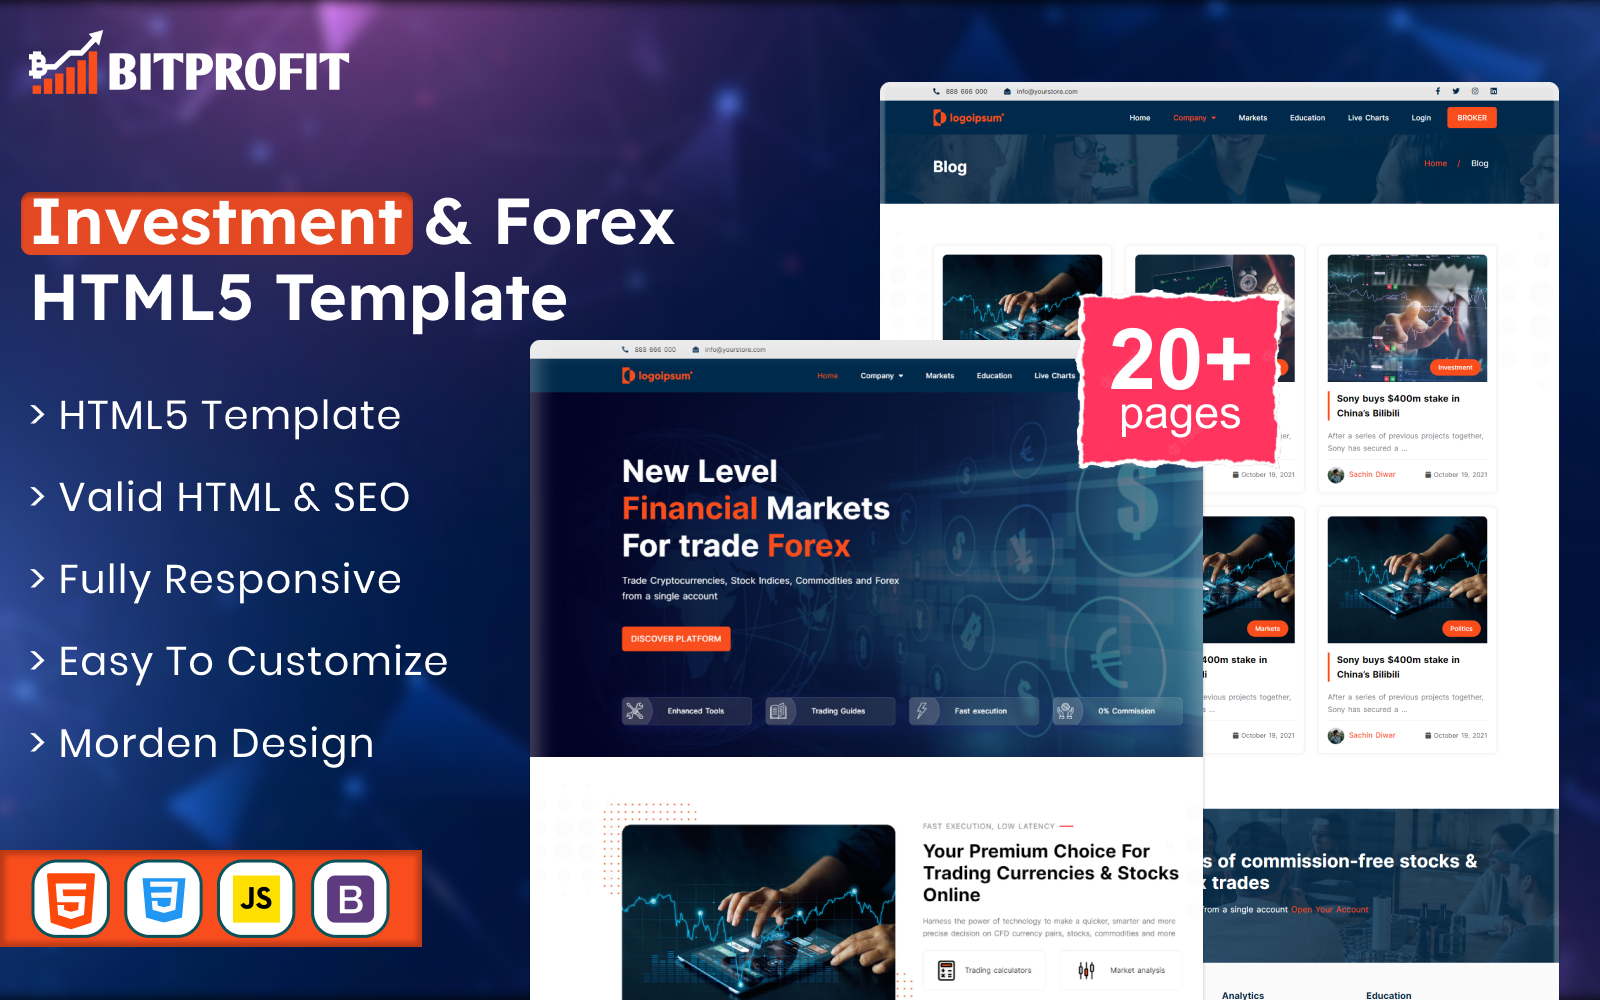 BitProfit - Investment and Forex HTML5 Template